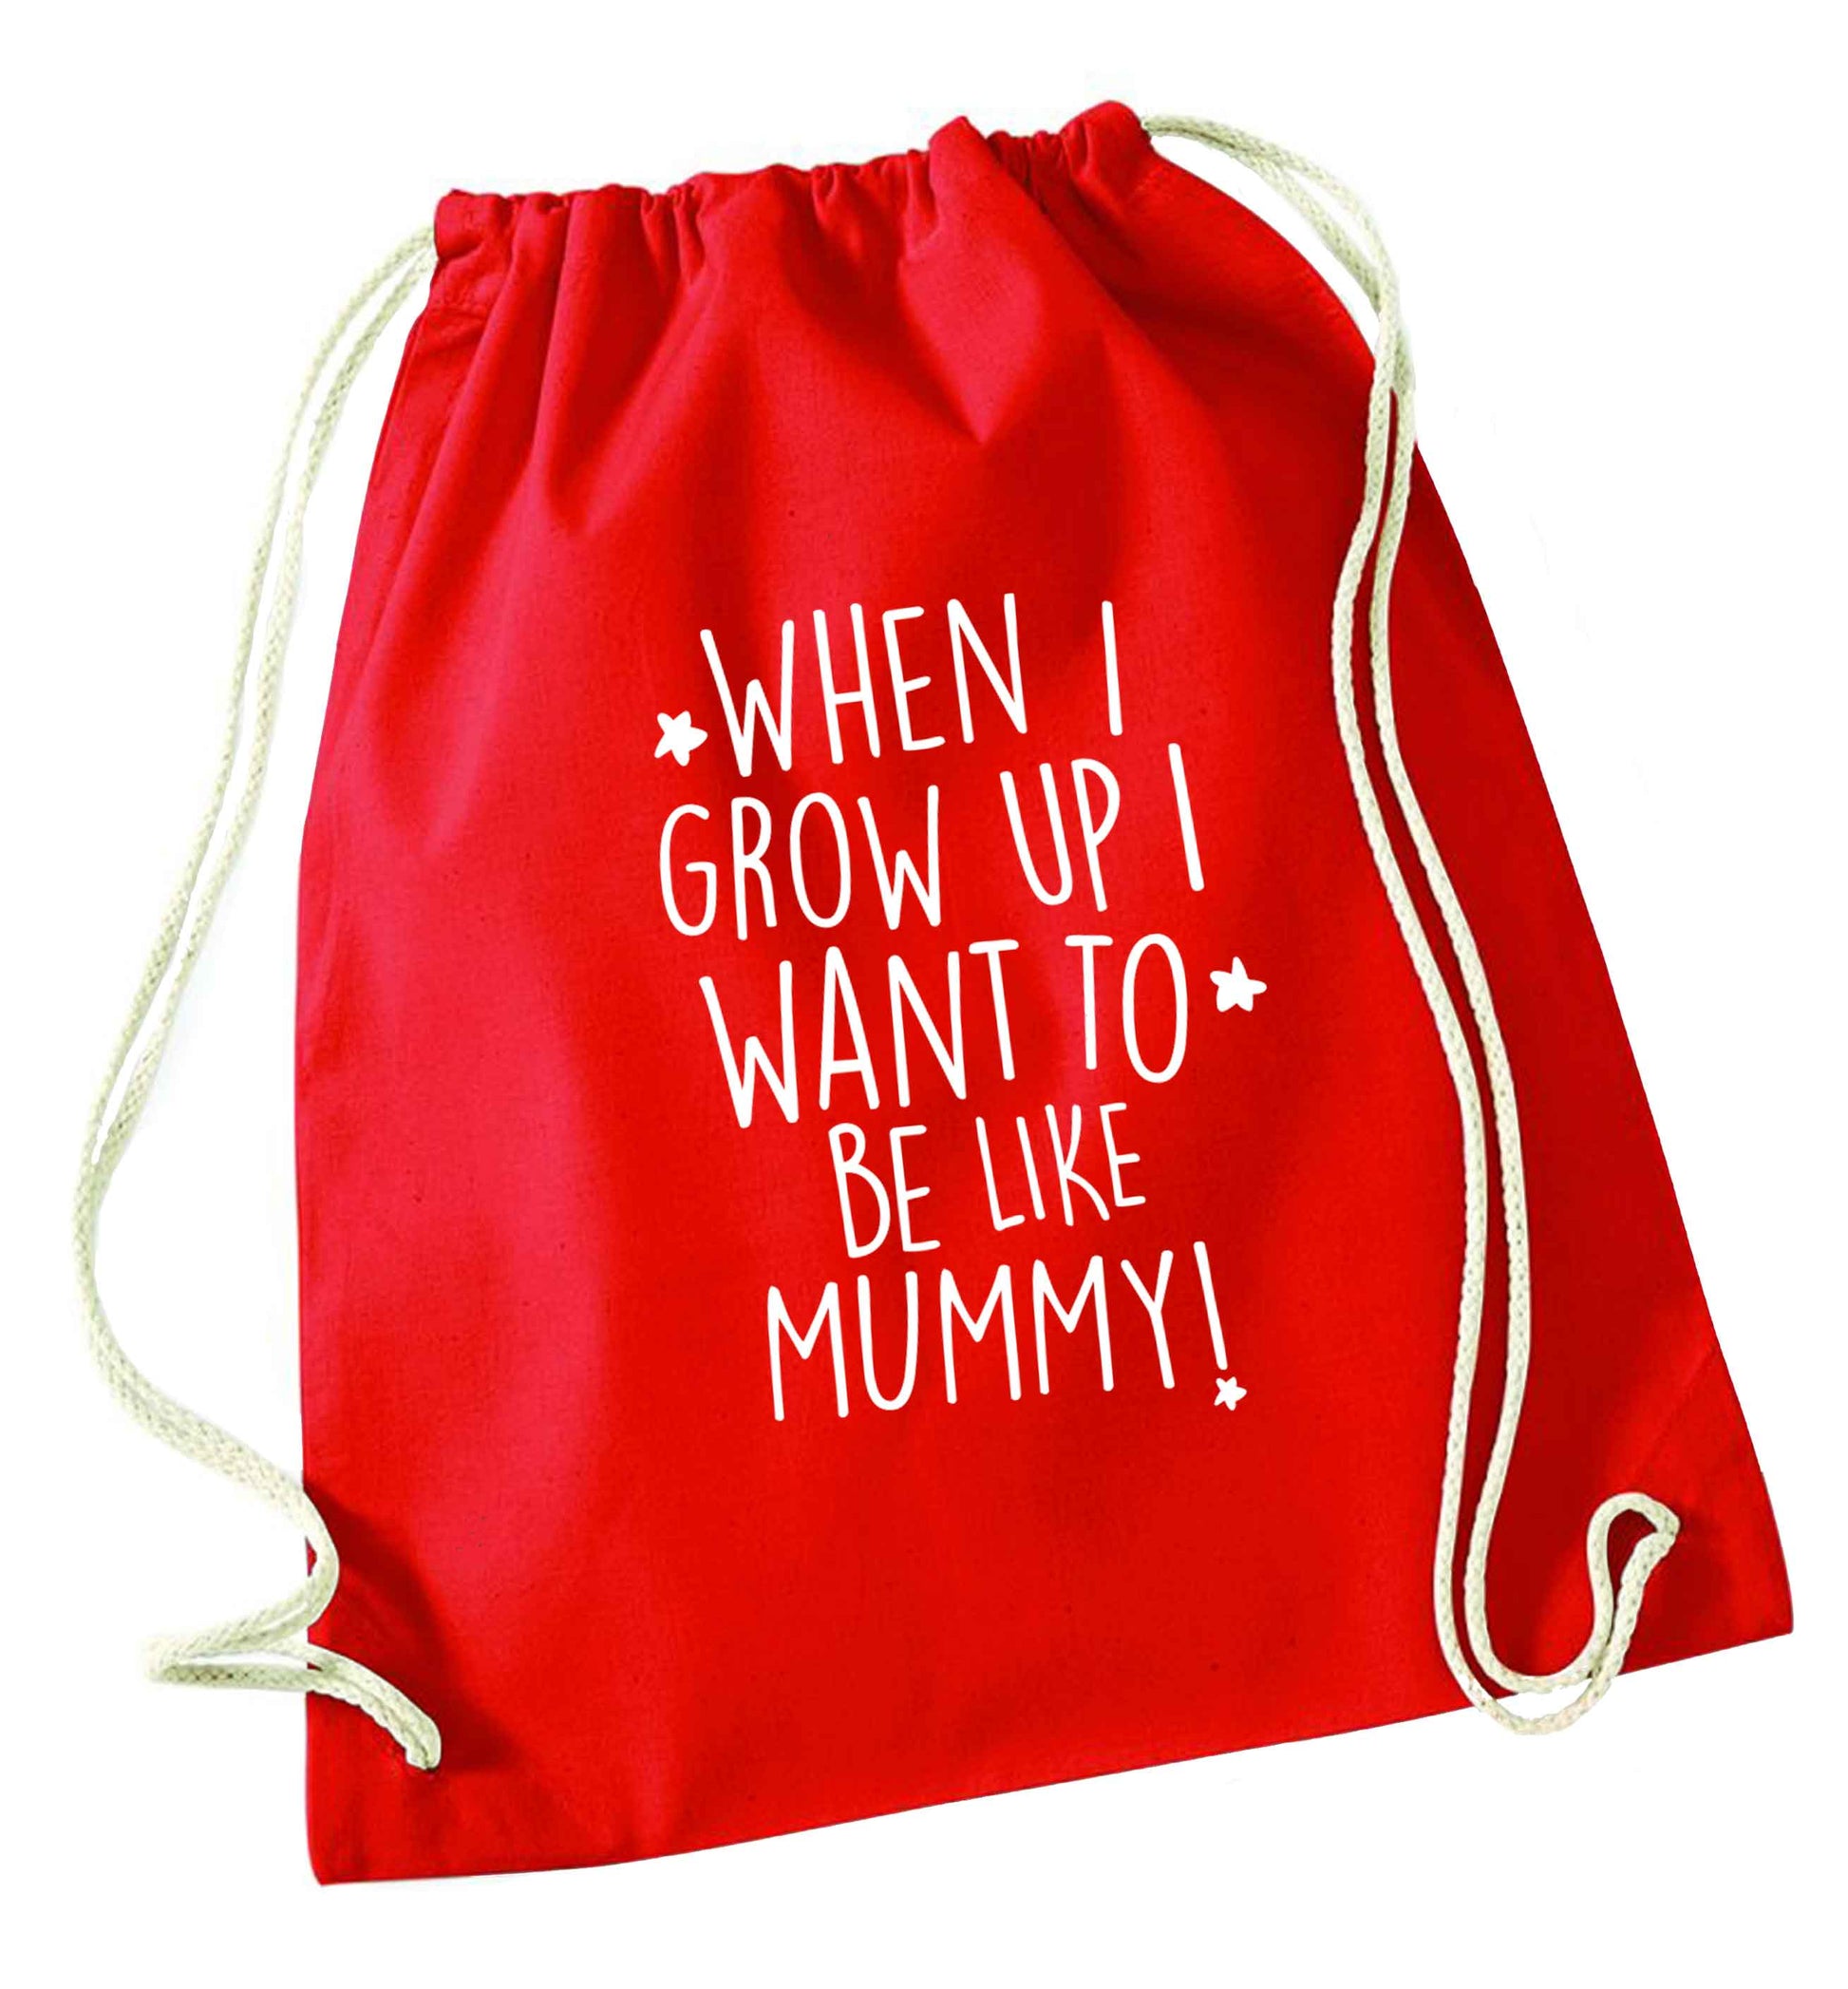 When I grow up I want to be like my mummy red drawstring bag 